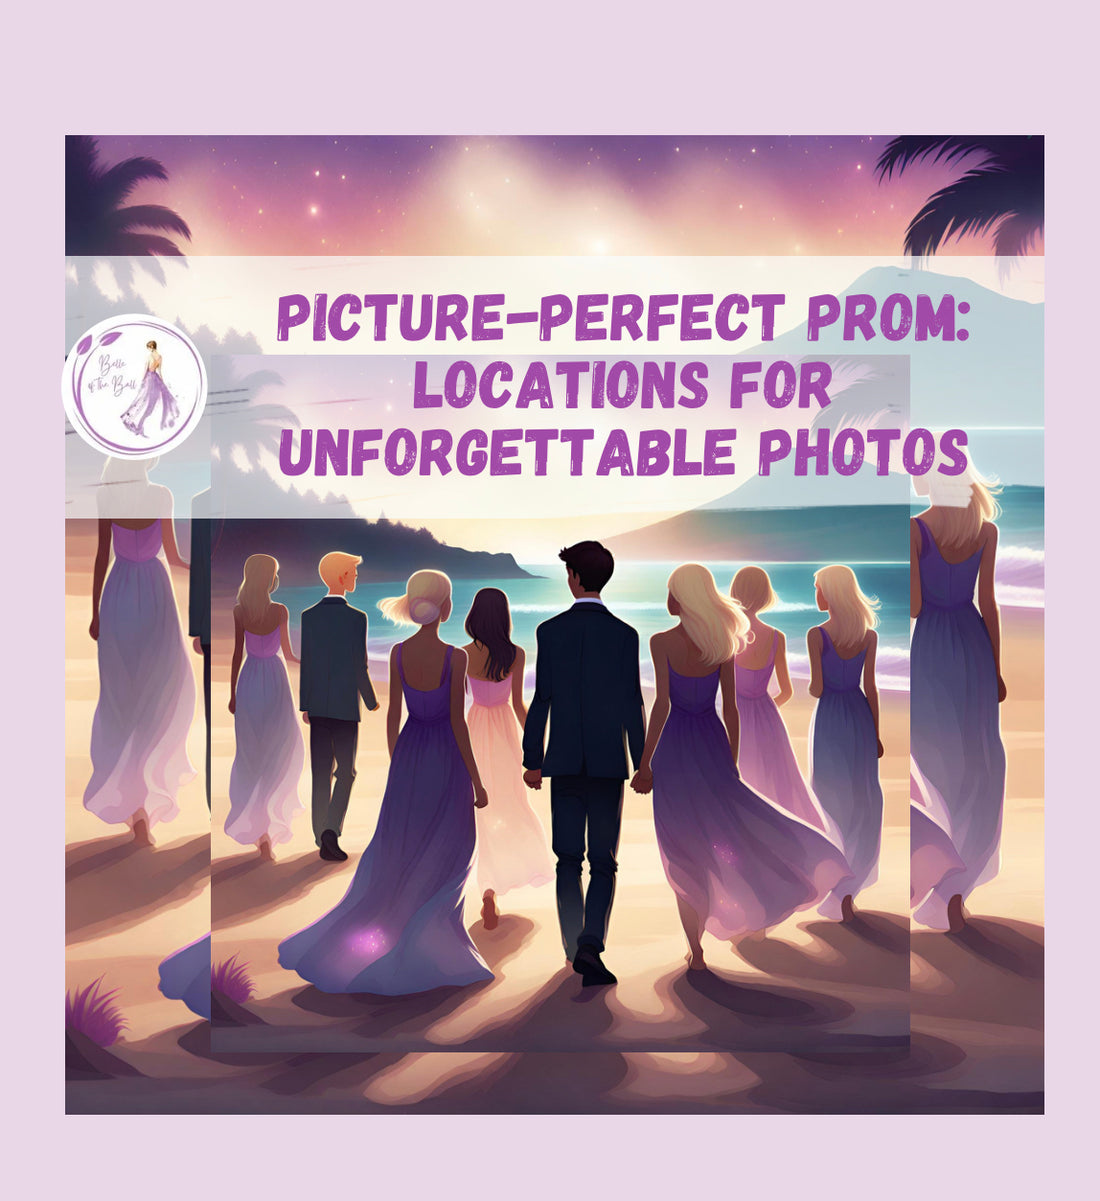 Picture-Perfect Prom: Locations for Unforgettable Photos